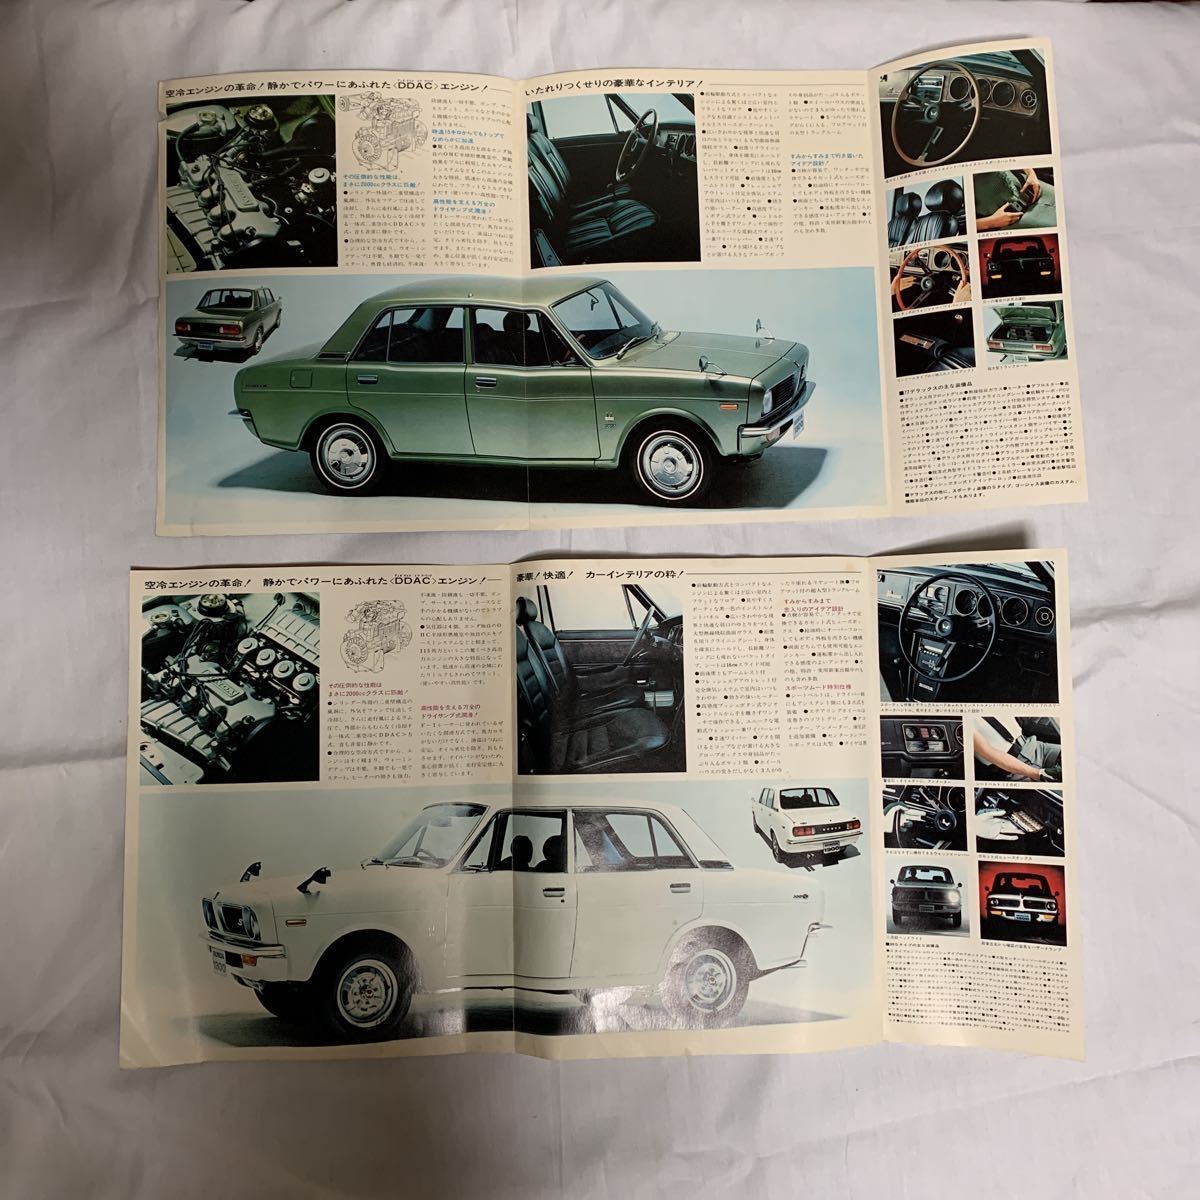  Honda 1300 77 Deluxe 99S type that time thing leaflet pamphlet old car 77DELUXE 99S-TYPE